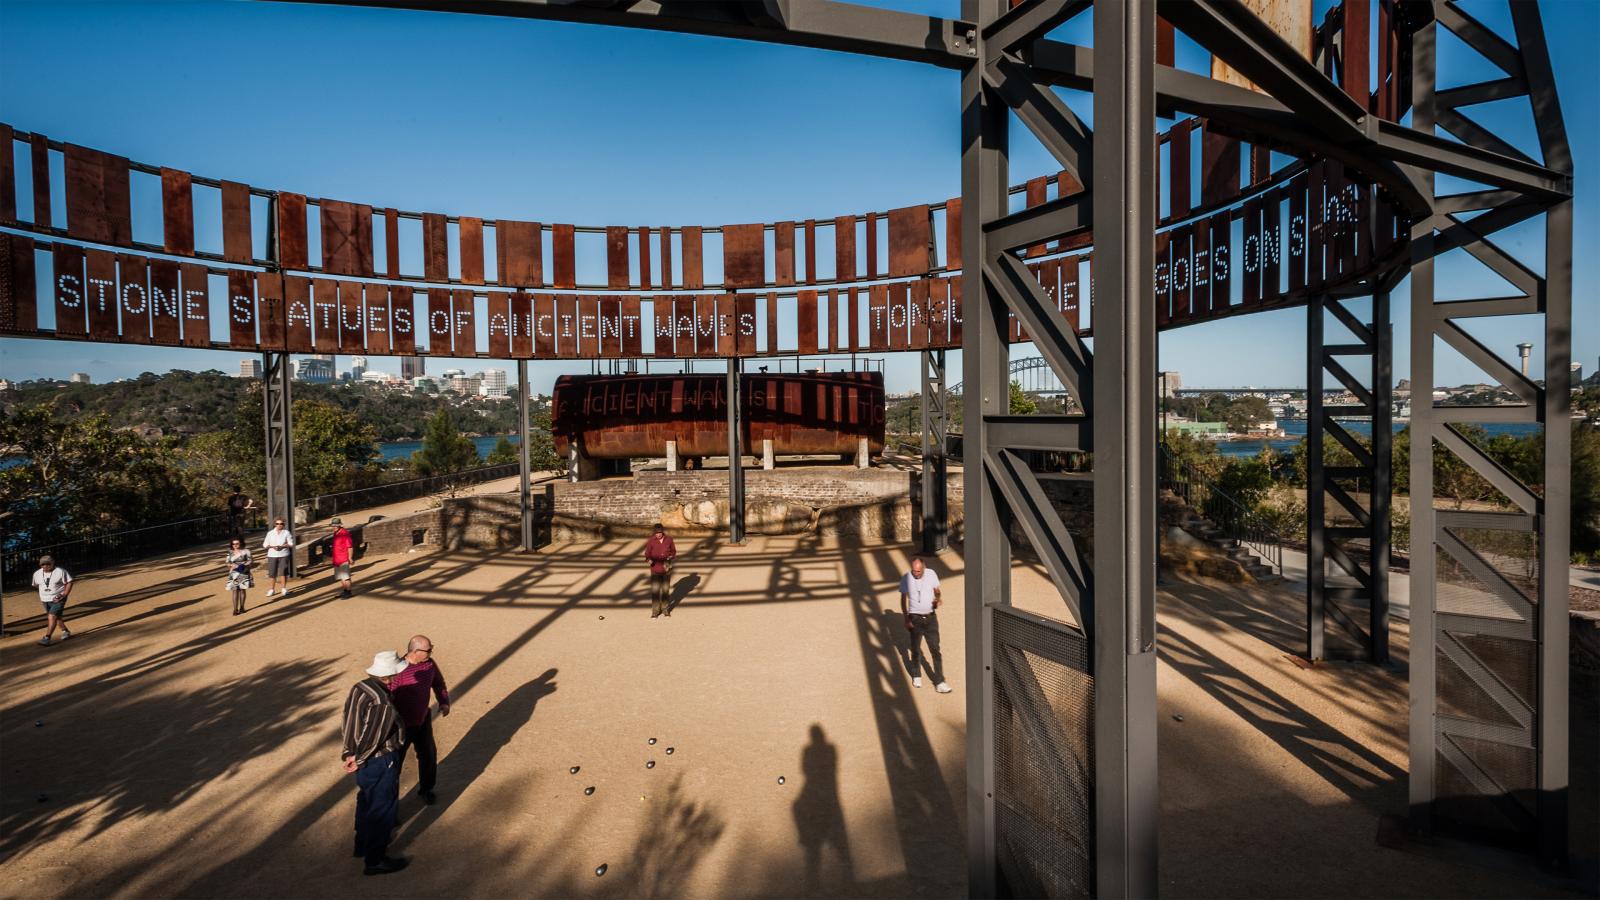 Visitors walk around the Westpac War Memorial on top of Mt. Coot-tha in Brisbane, reminiscent of Ballast Point Park. The memorial features towering steel structures, a circular arrangement partially inscribed with text, and offers scenic views of the surrounding landscape. Shadows of the structure fall on the ground.